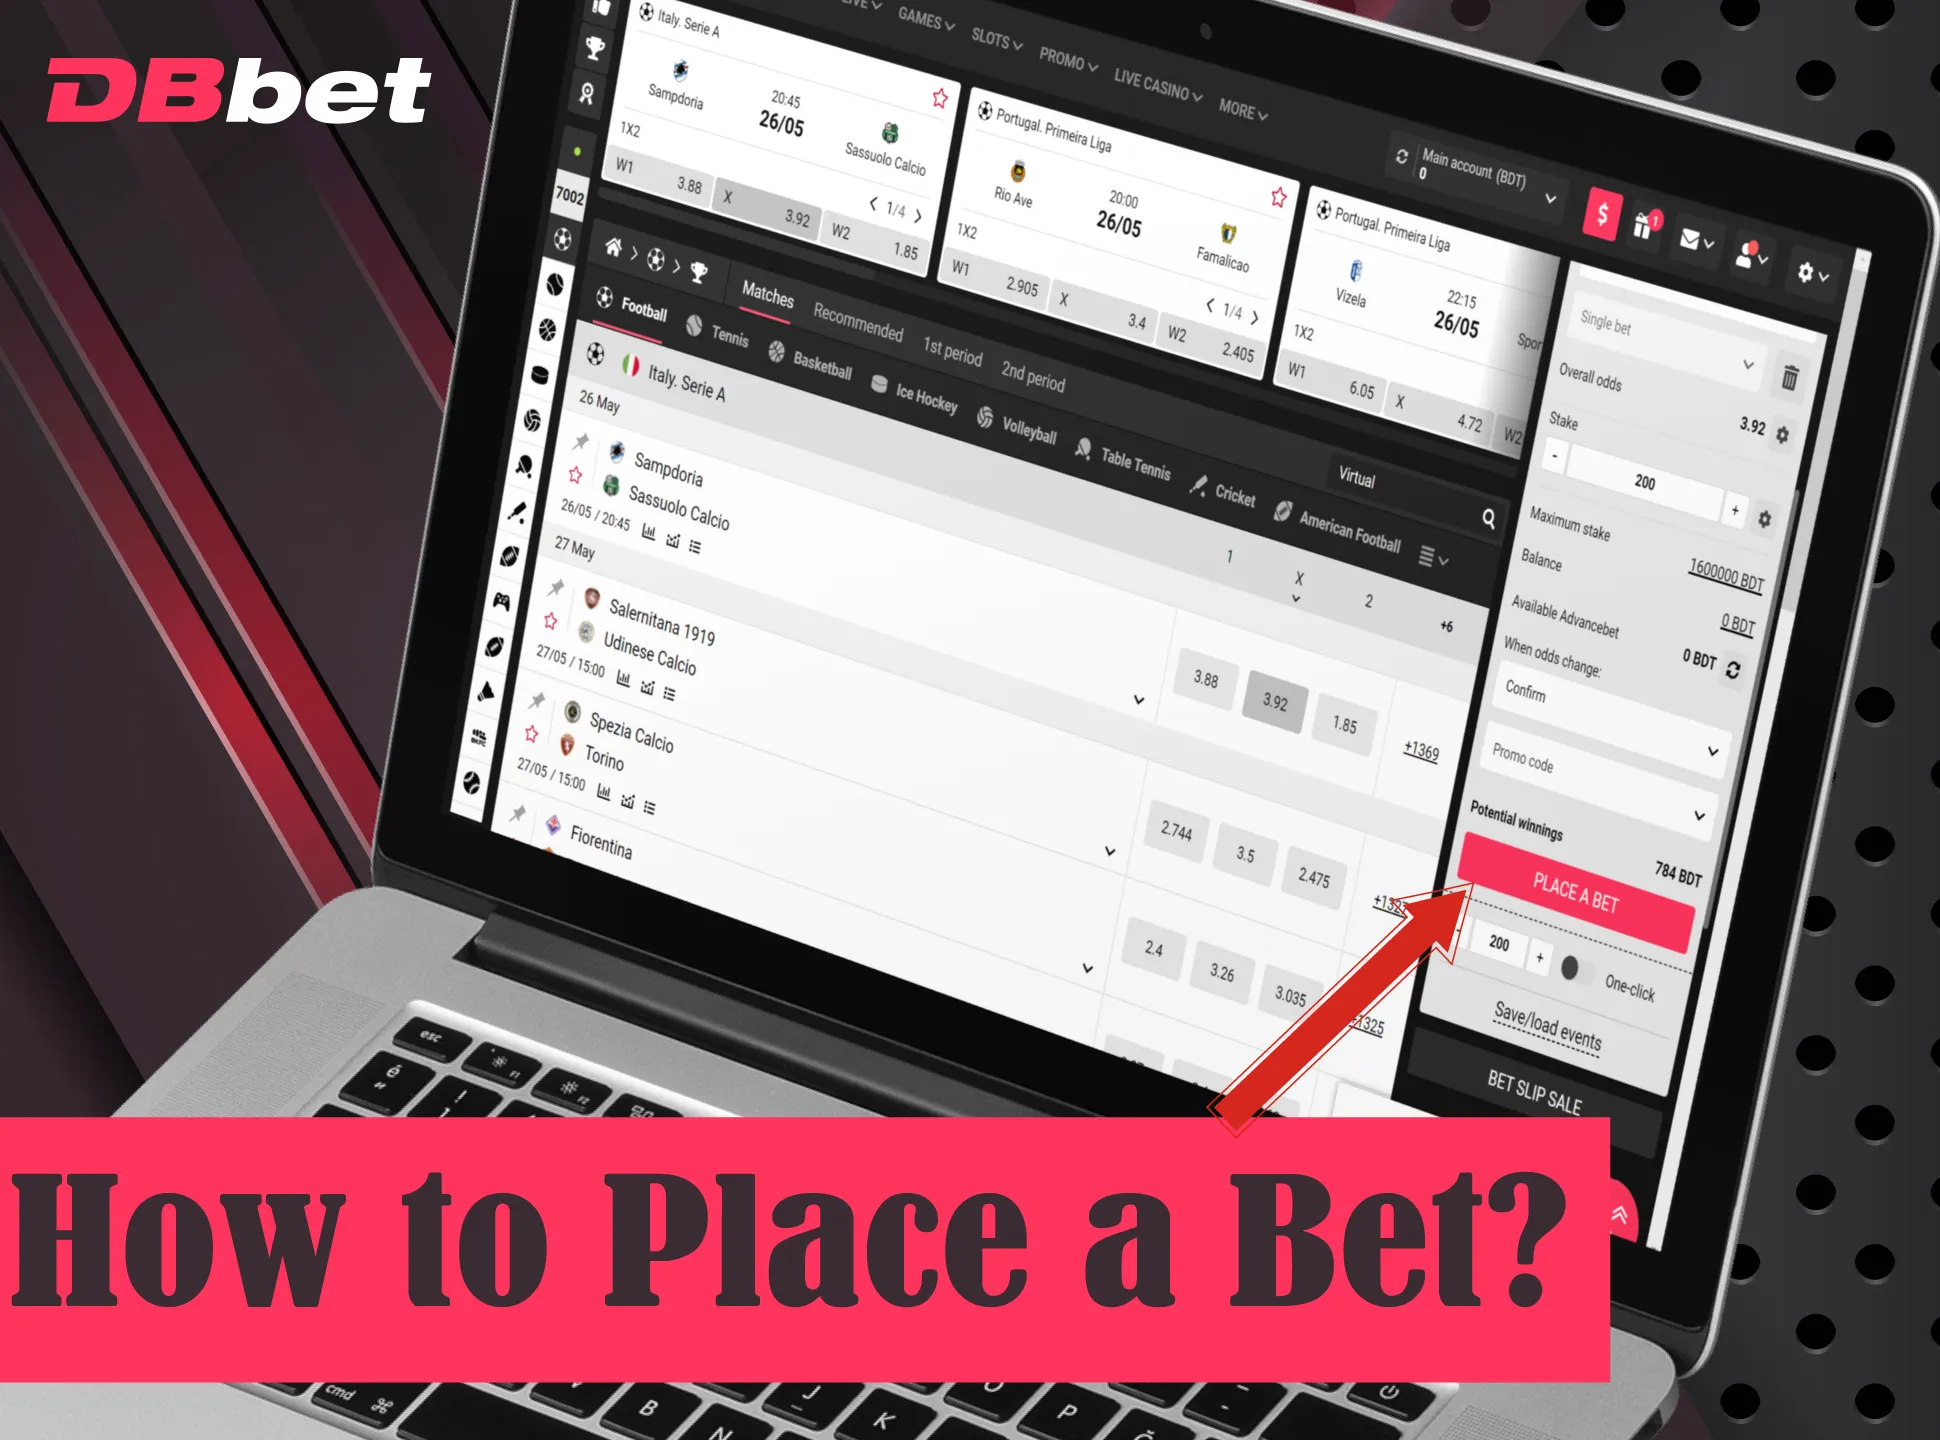 It's easy to place bets at DBbet.